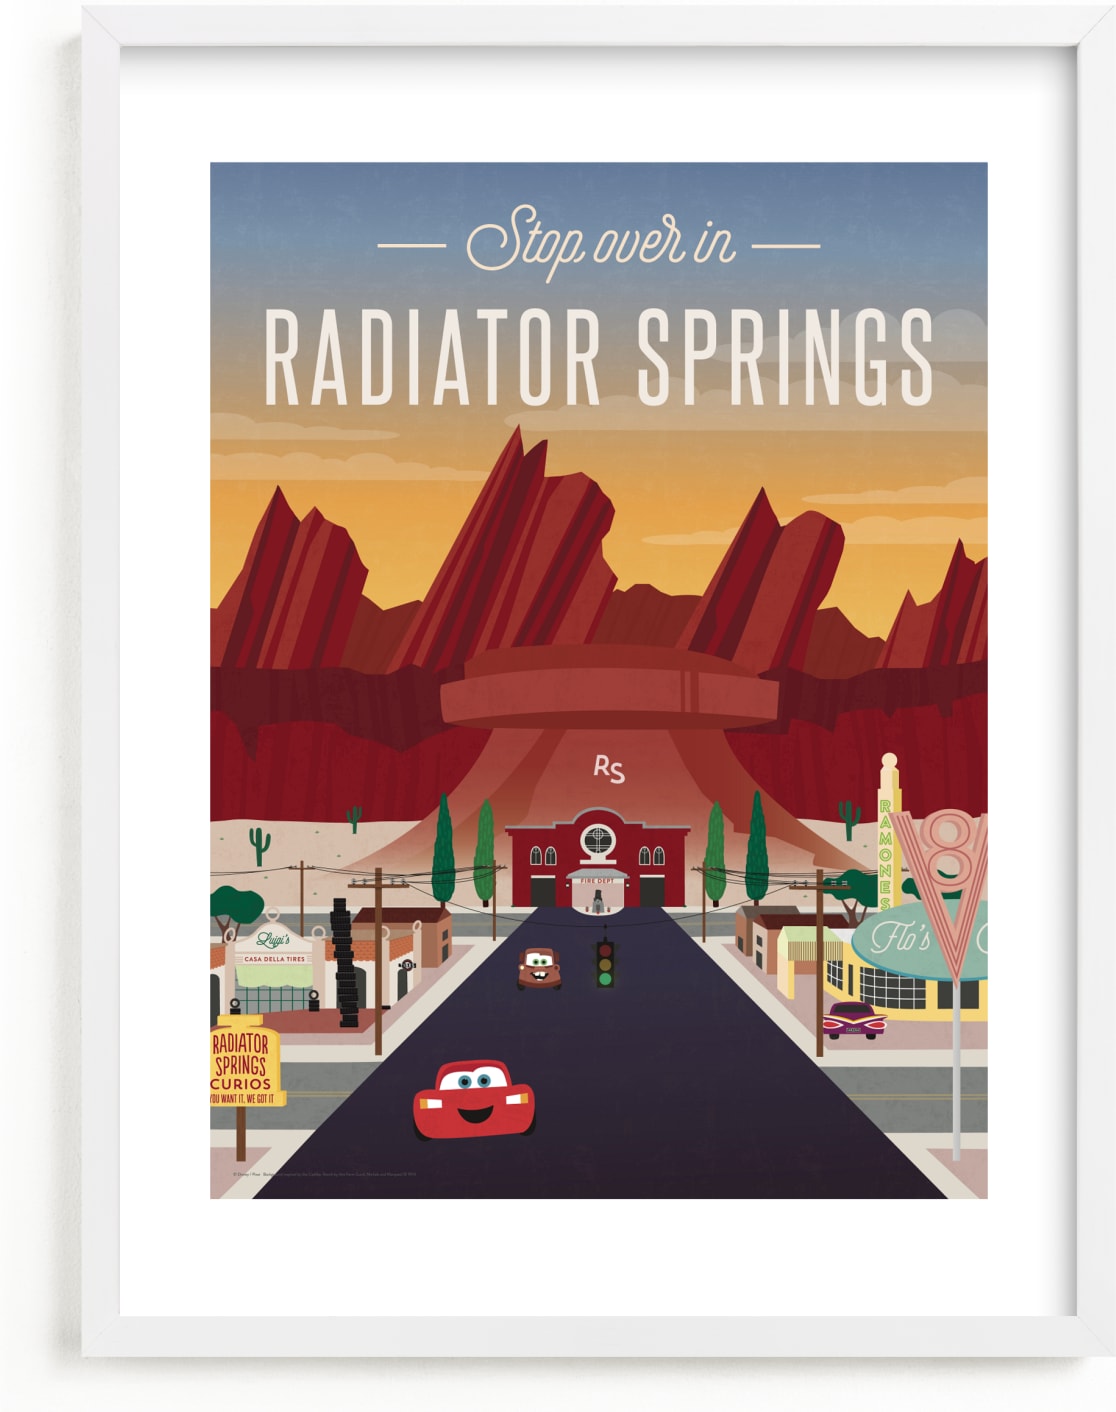 This is a colorful disney art by Erica Krystek called Stop Over In Radiator Springs from Disney and Pixar's Cars.